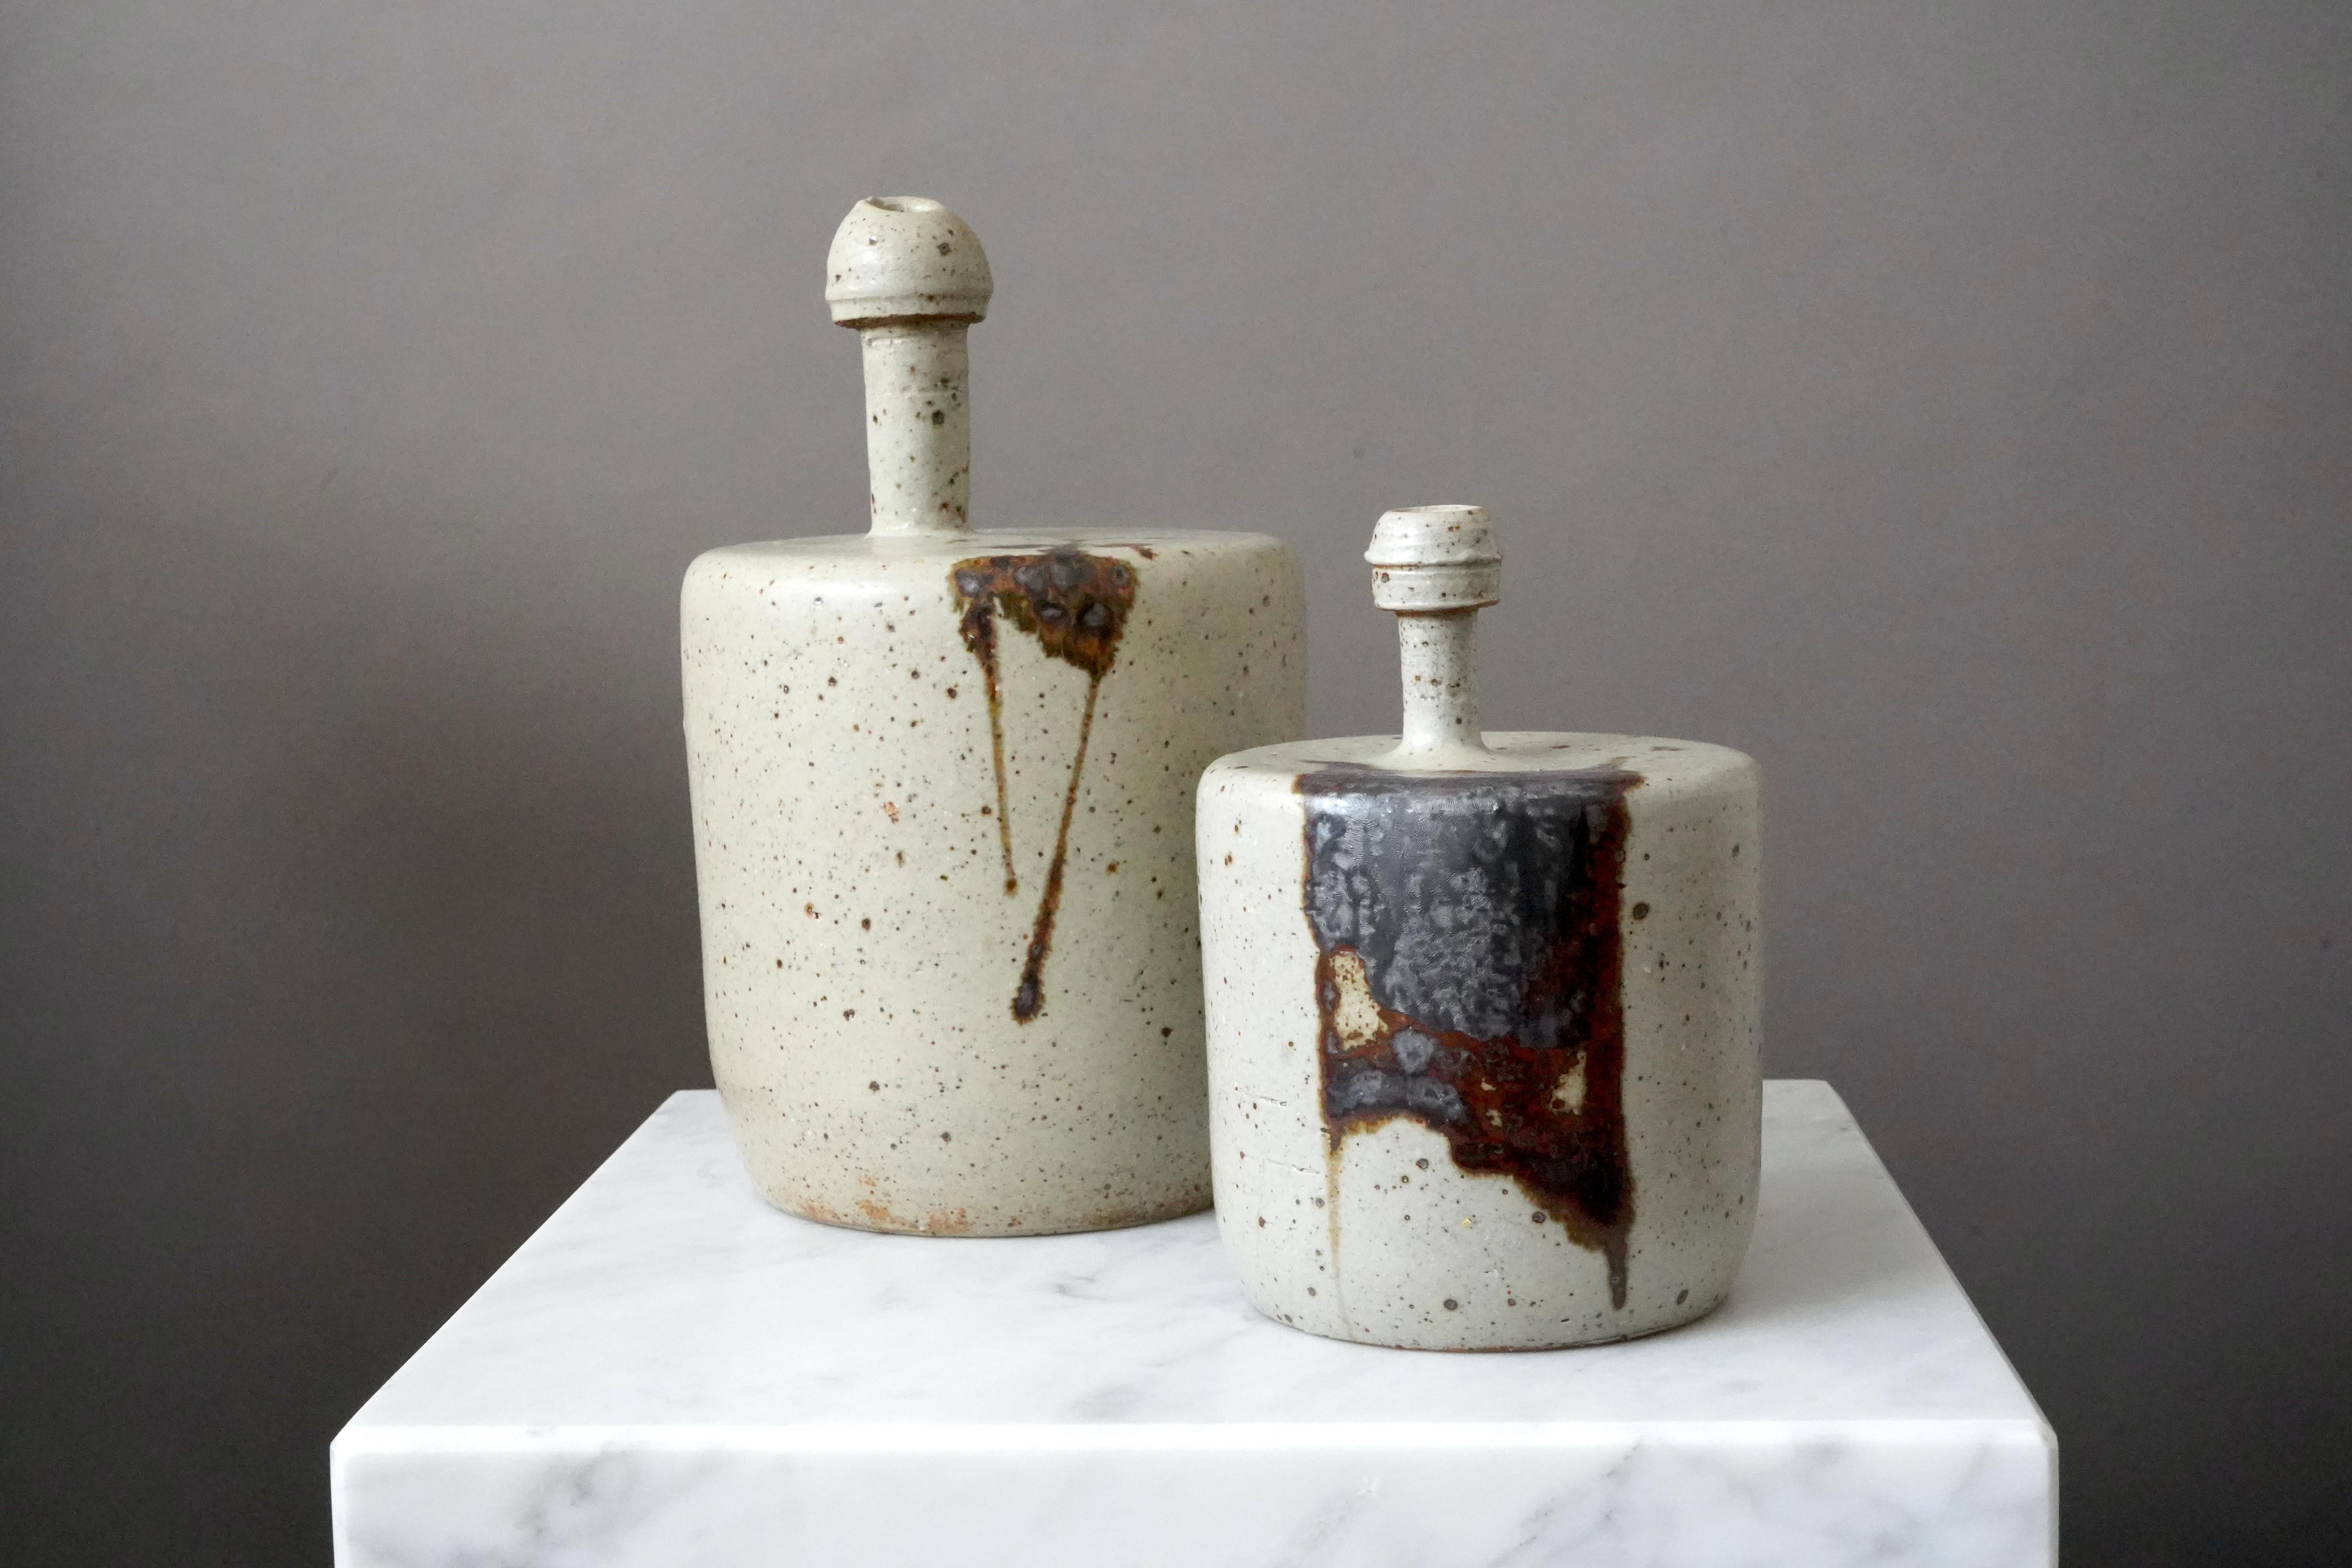 A pair of beautiful stoneware vases made by Claes Thell, in the Artist's studio, Höganäs, Sweden. This model - the so-called 